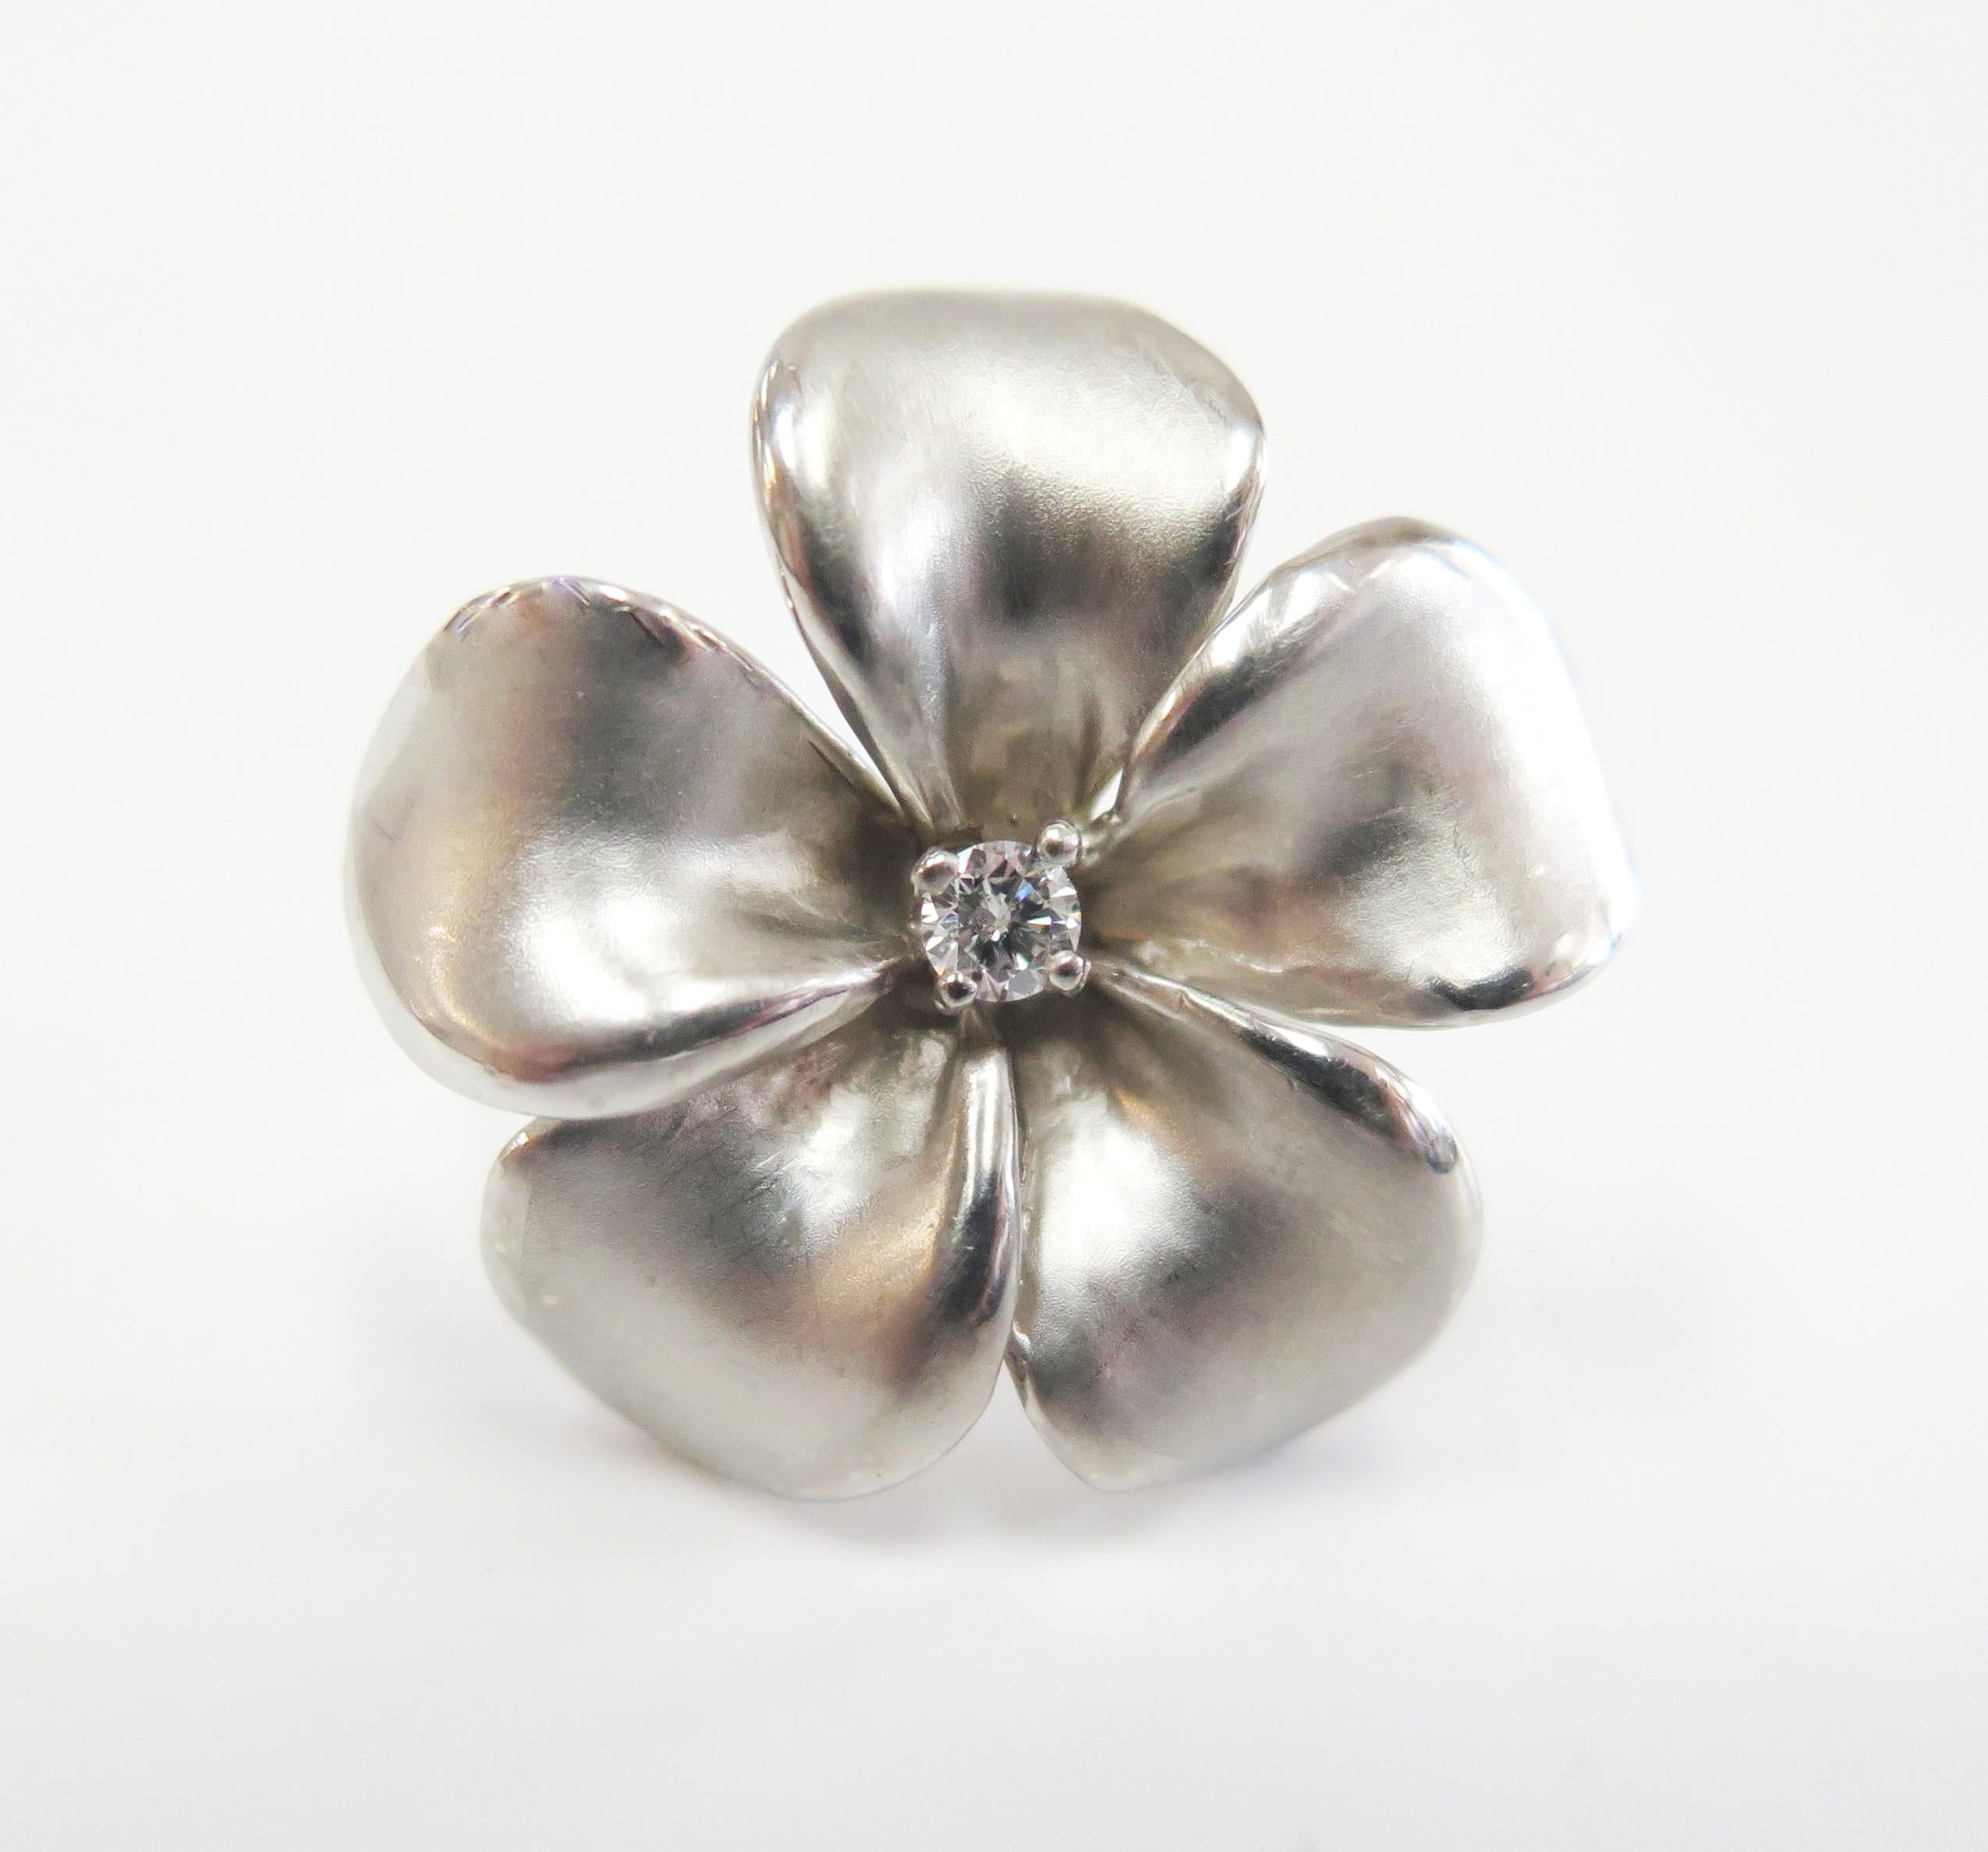 It's always springtime when you're wearing this sunny flower statement ring. A sparkling center diamond of 0.10 Carat finishes the look. You won't need another piece of jewelry when you wear this pretty ring!

14 karat white gold
Size 7 1/2 - easily